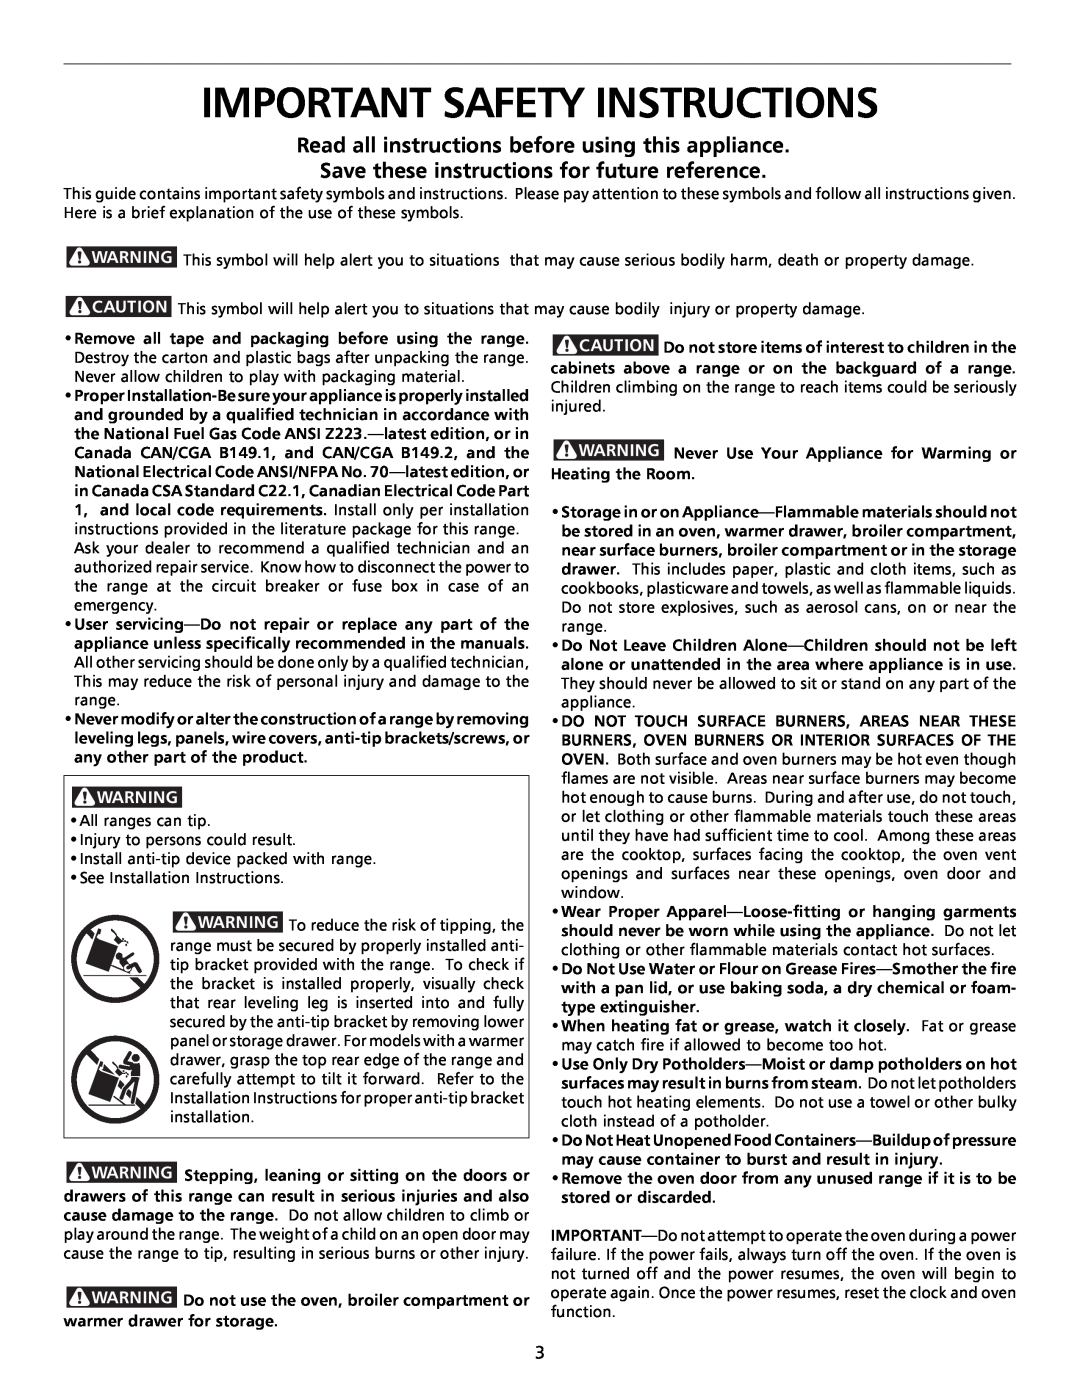 Tappan 316000191 manual Important Safety Instructions, Read all instructions before using this appliance 